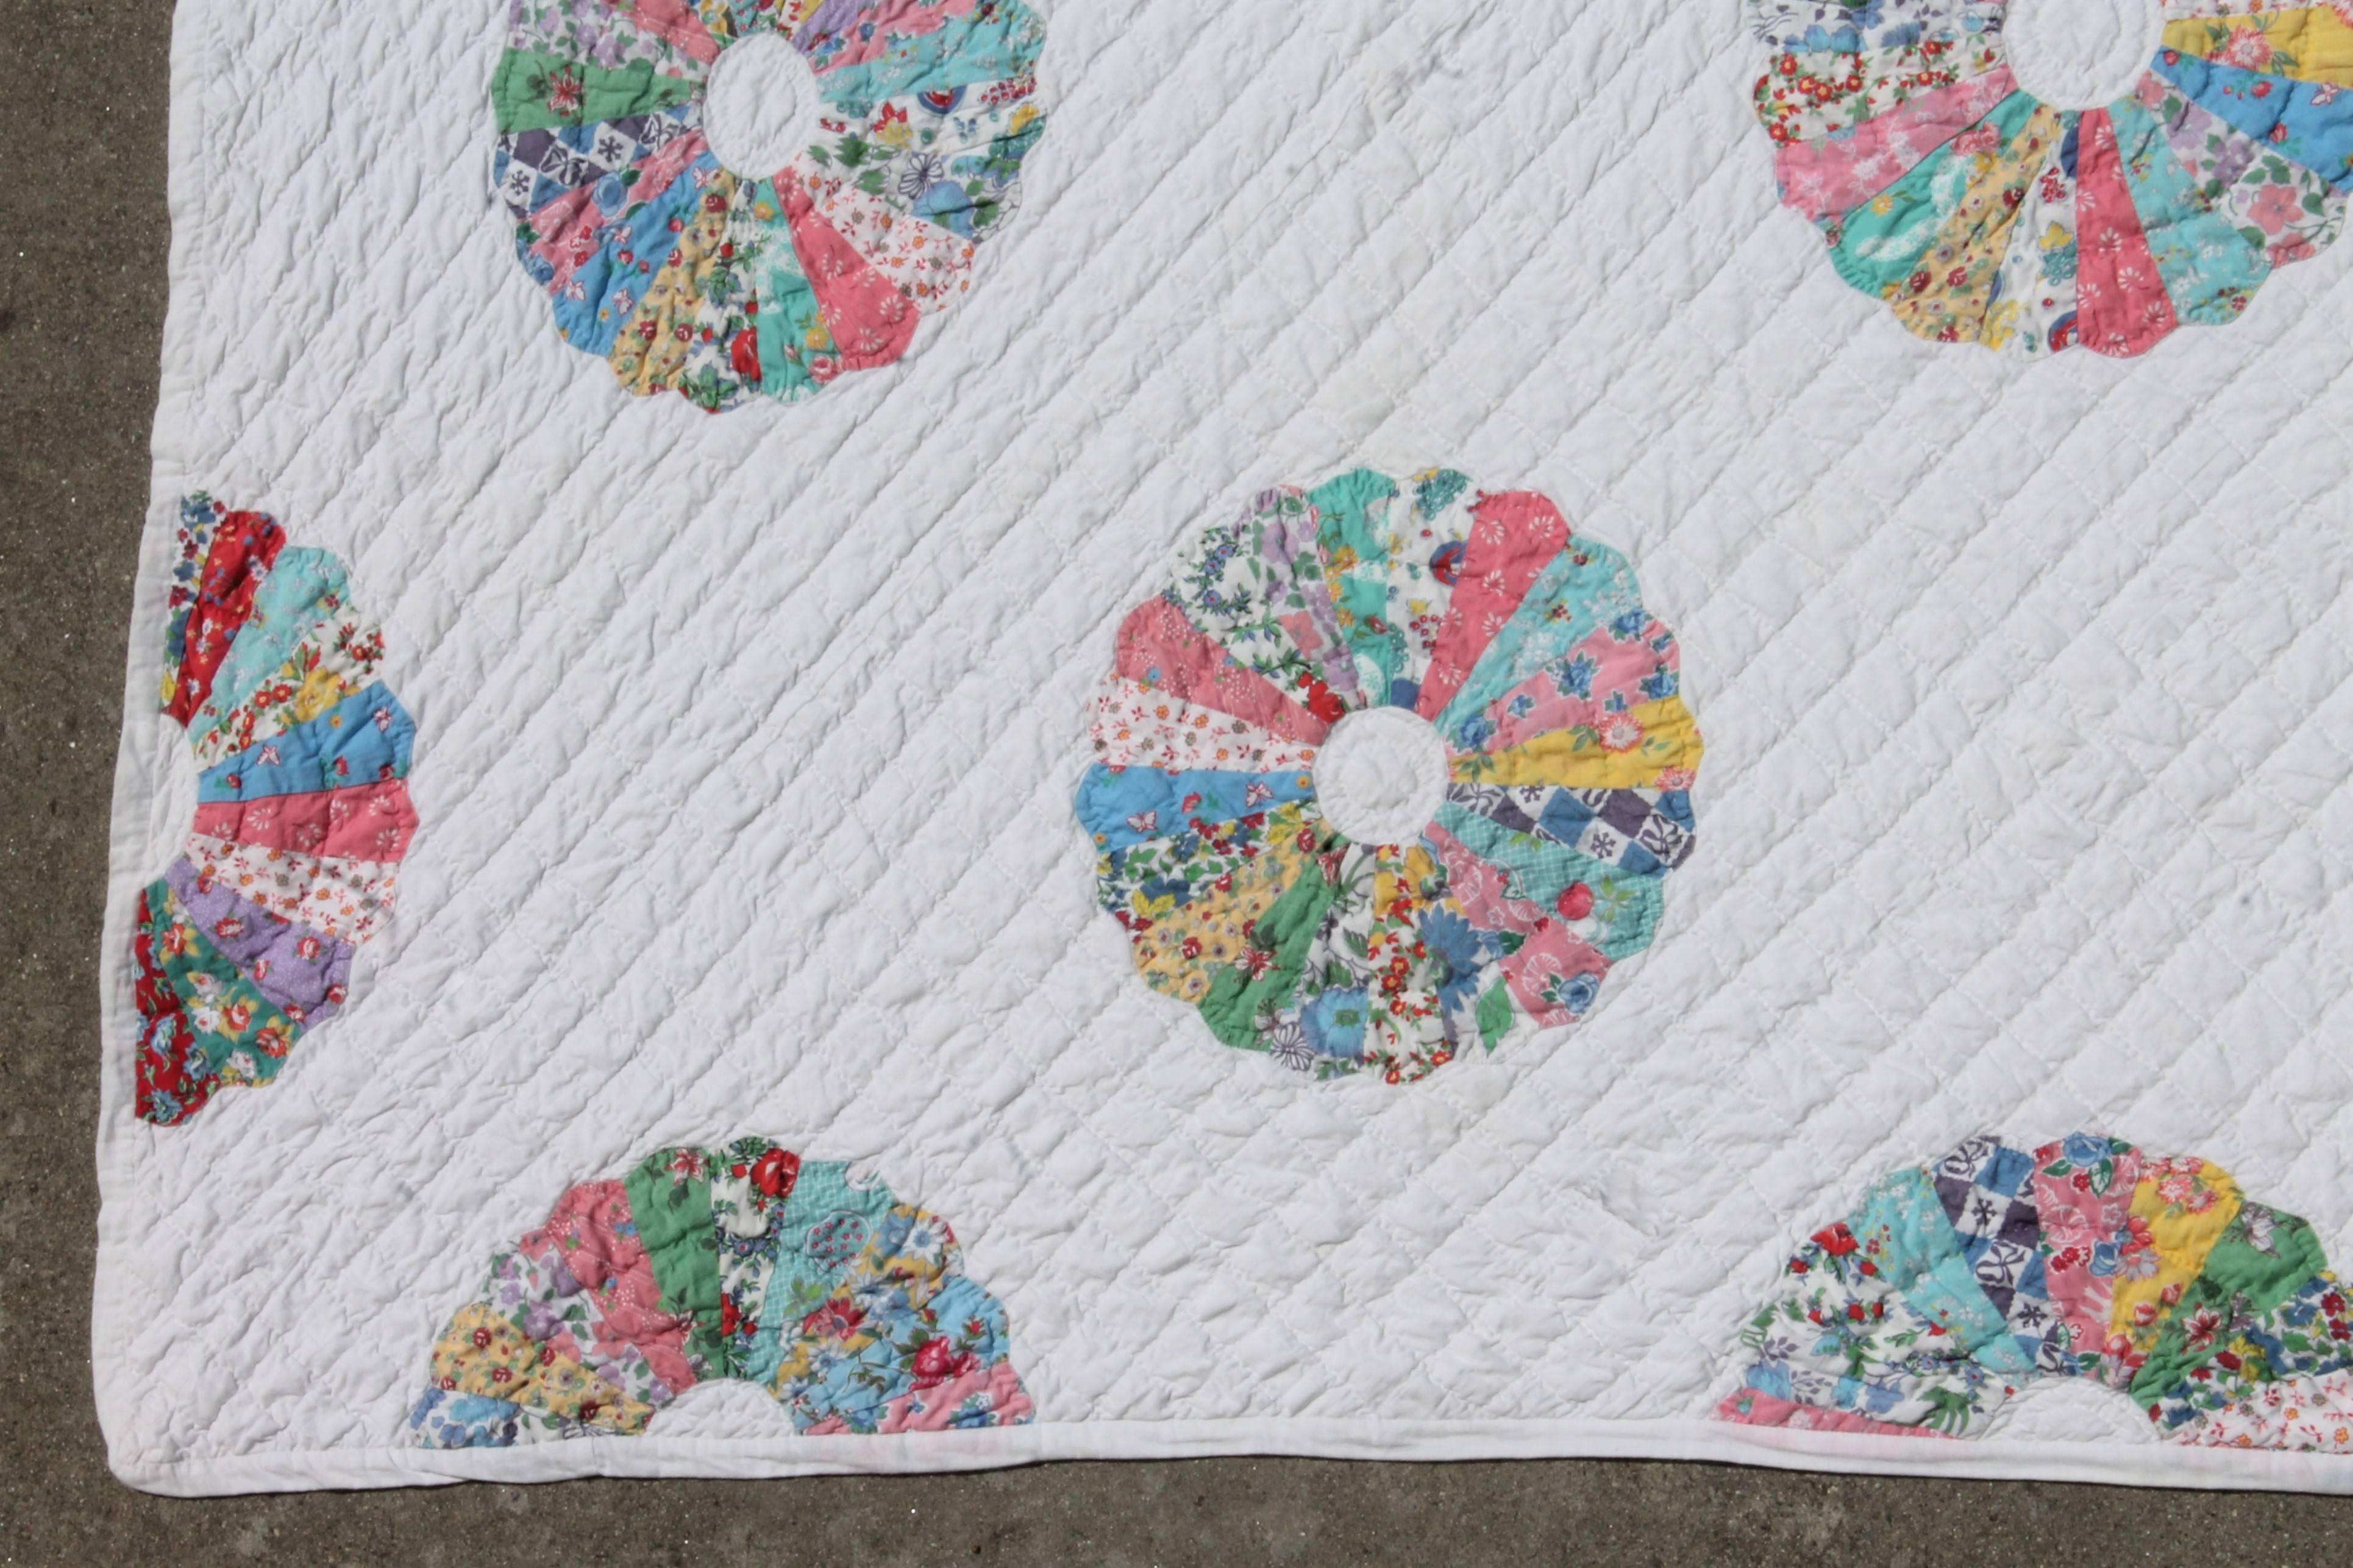 This fancy 1930s Dresden plate pastel appliqué quilt is in fine condition. The quilting and appliqué work is superb! There are tiny small area of age spots in one area hardly visible.